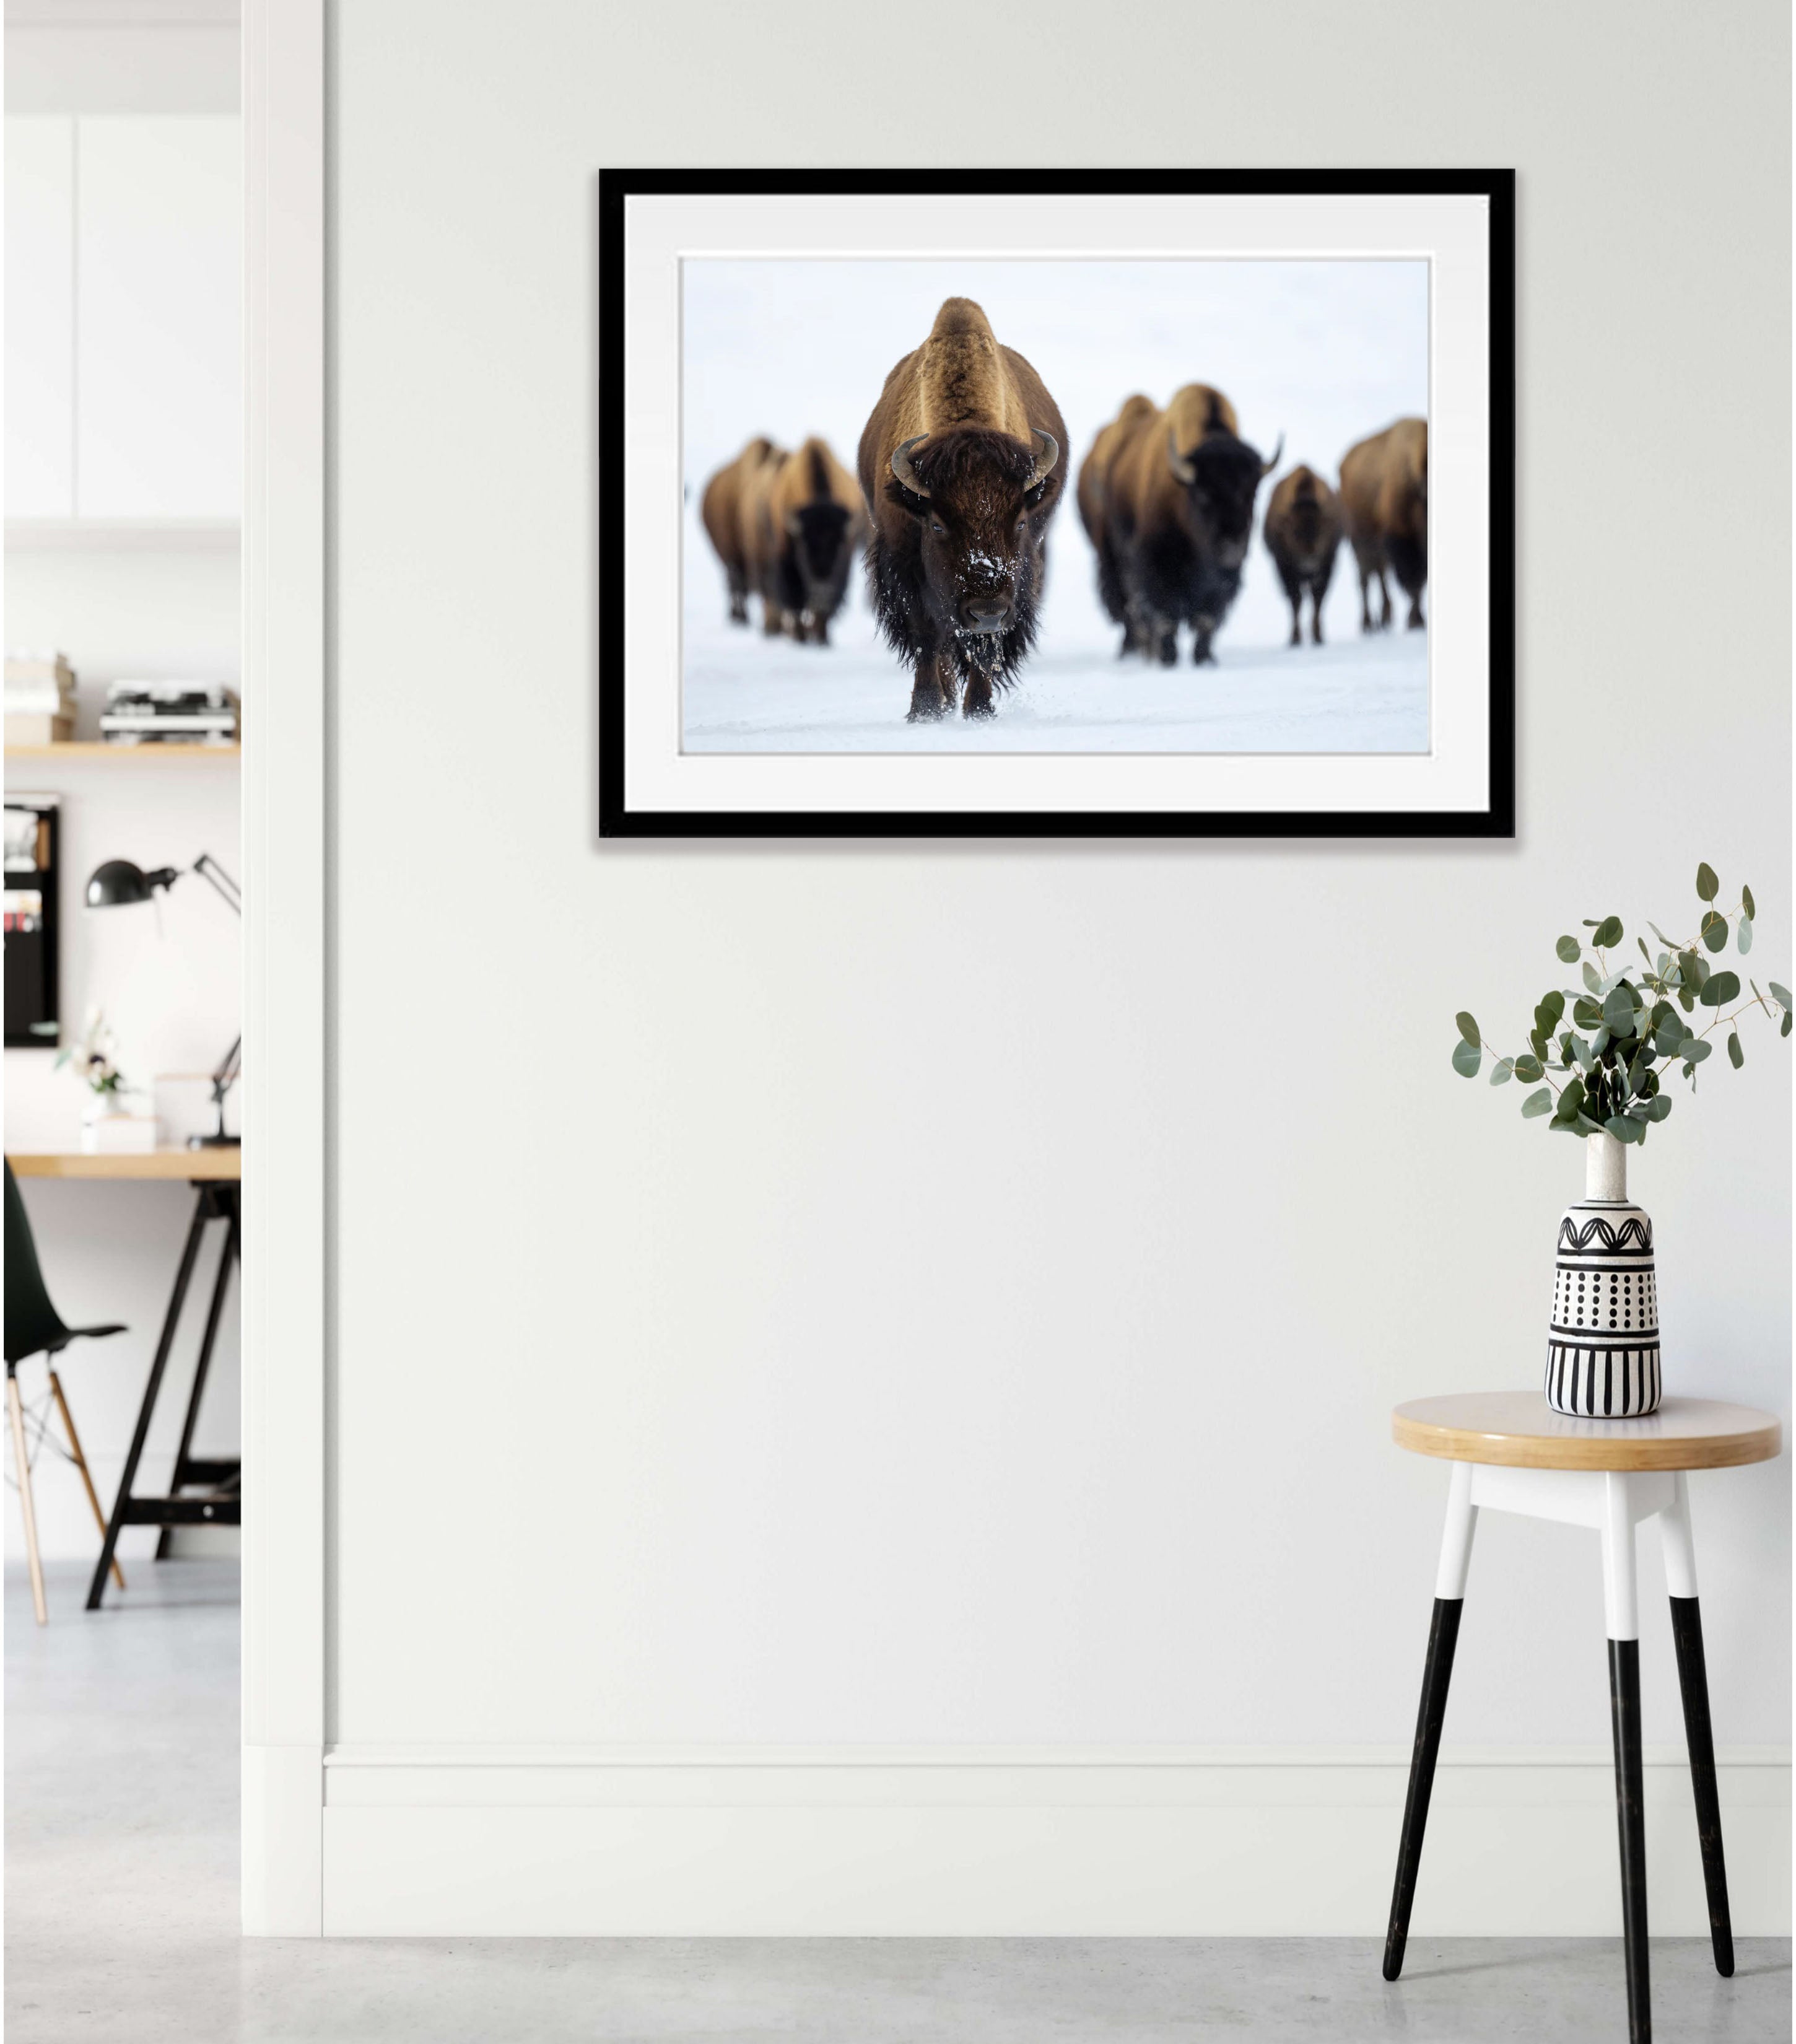 The Bison, Yellowstone NP